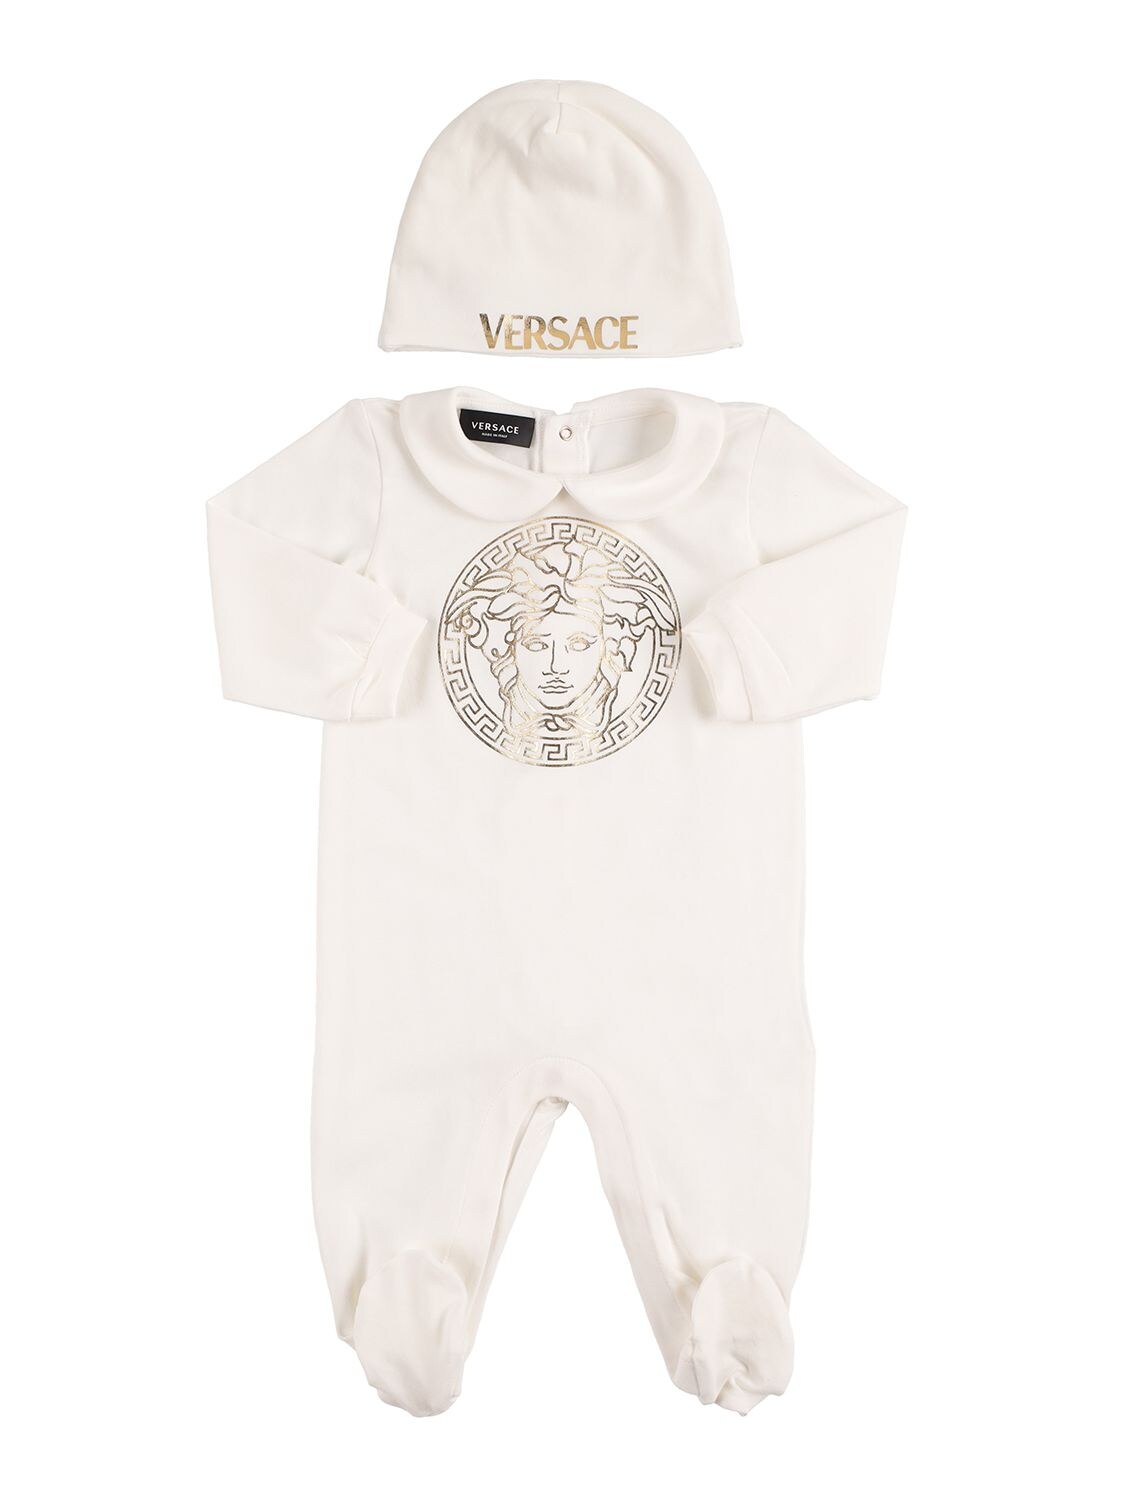 Versace Babies' Printed Cotton Jersey Romper & Hat In White